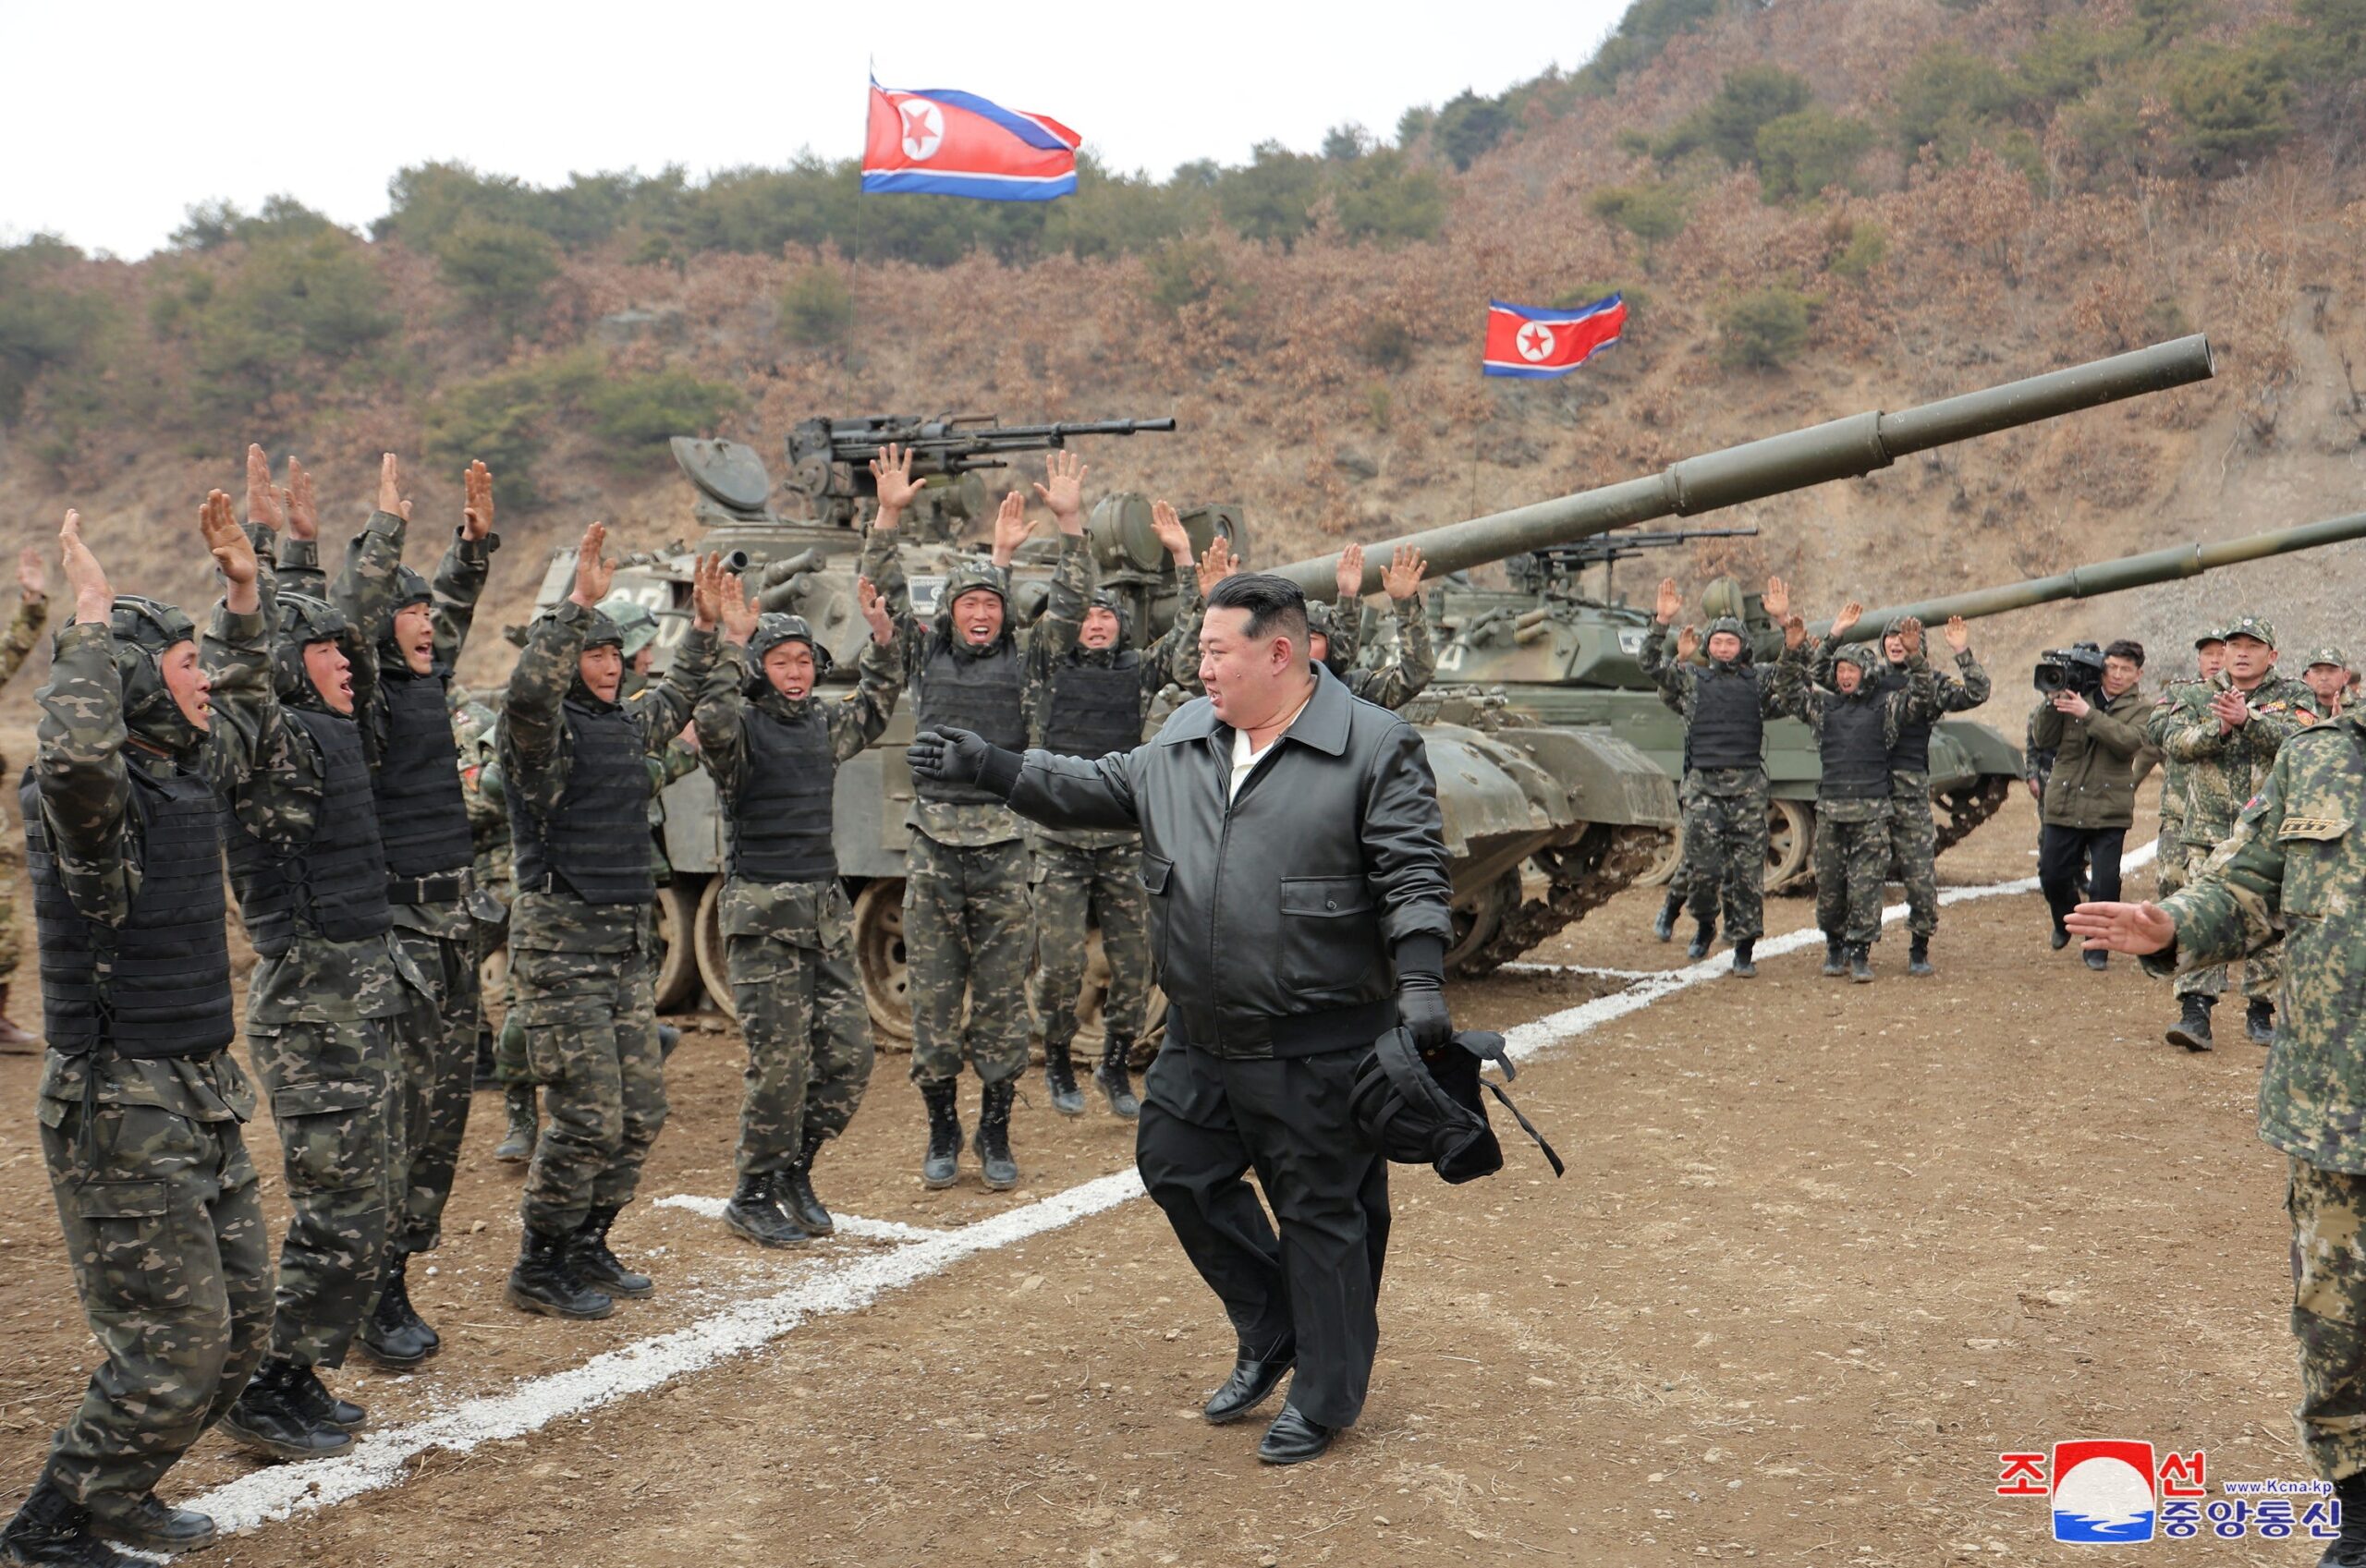 North Korean leader Kim Jong Un gestures at soldiers during a military demonstration